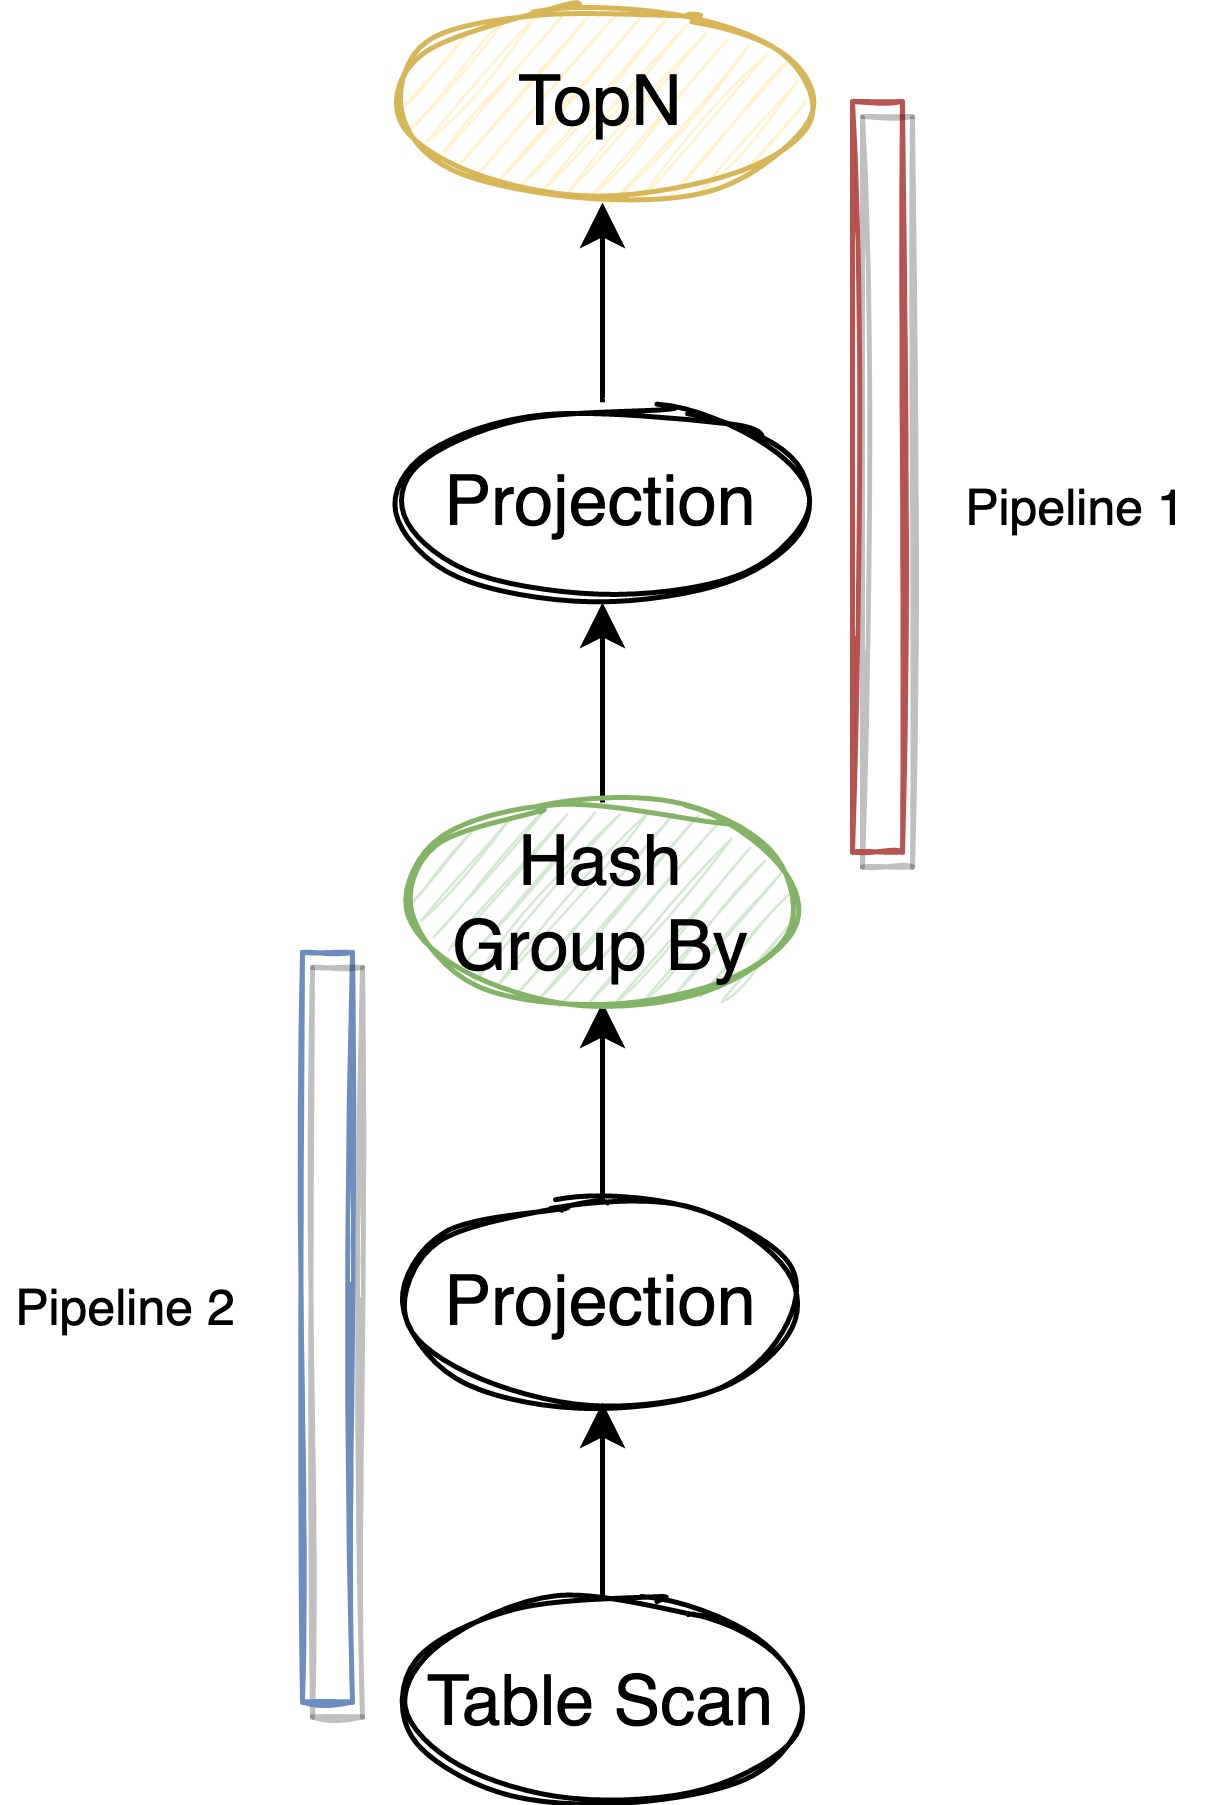 TopN and Aggregate to Pipelines